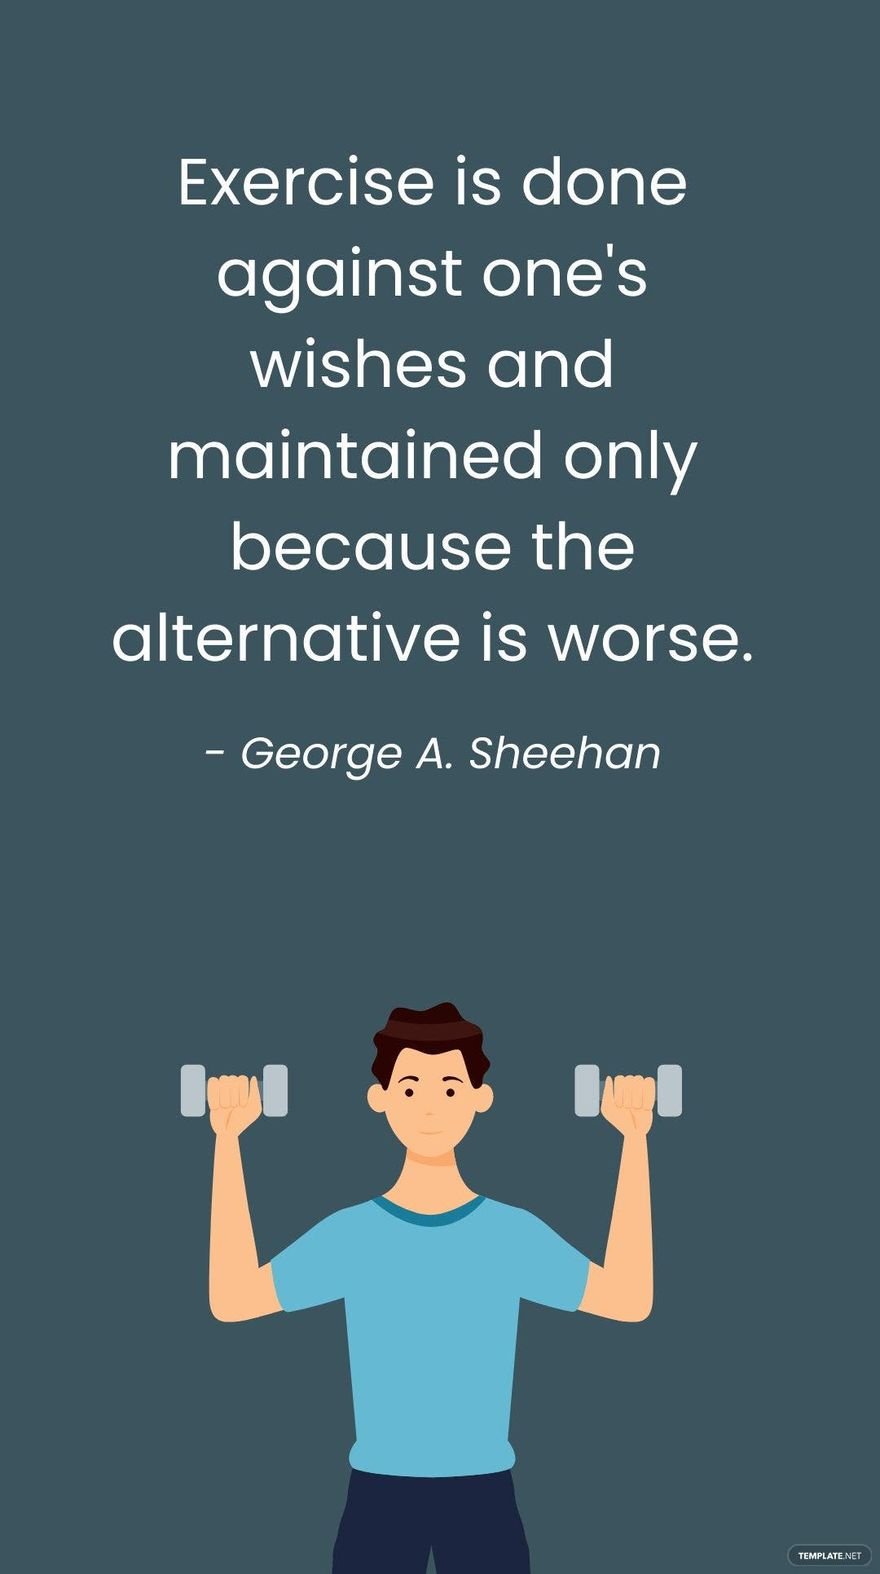 George A. Sheehan - Exercise is done against one's wishes and maintained only because the alternative is worse. in JPG